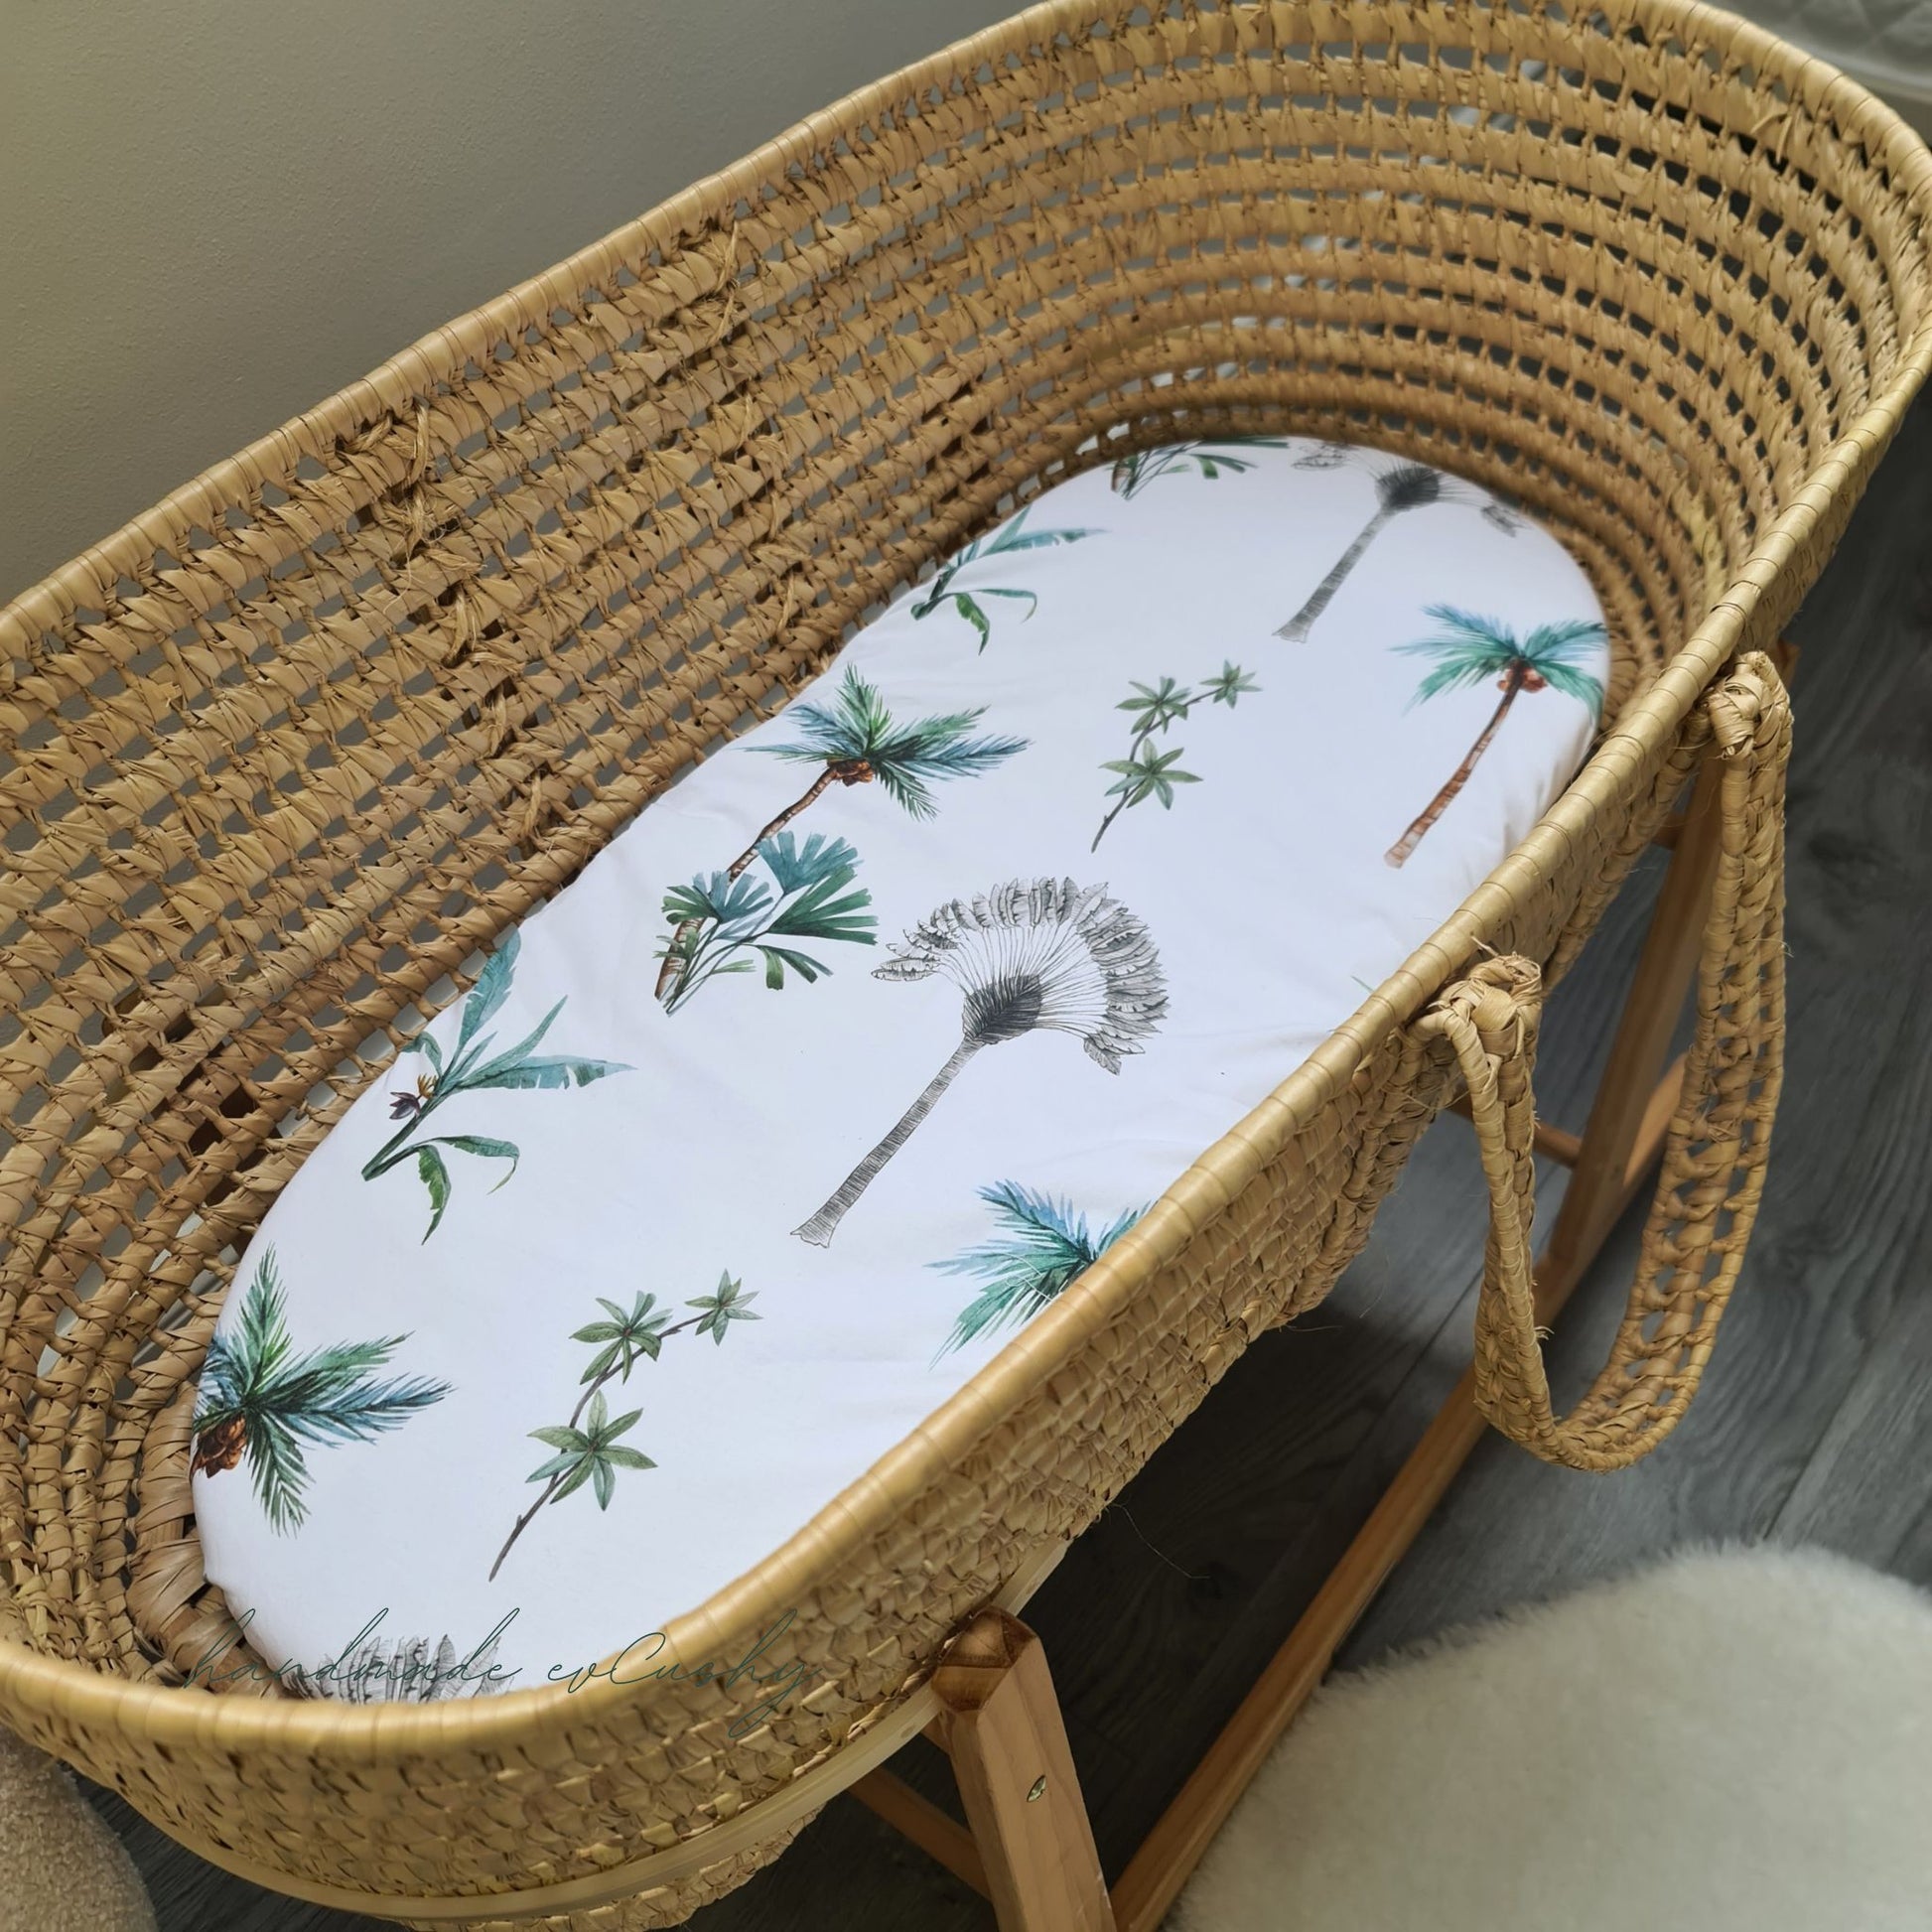 Fitted sheet for Moses basket and carrycot -  white with palm trees grey and green . High-quality 100% cotton for baby's comfort and style.